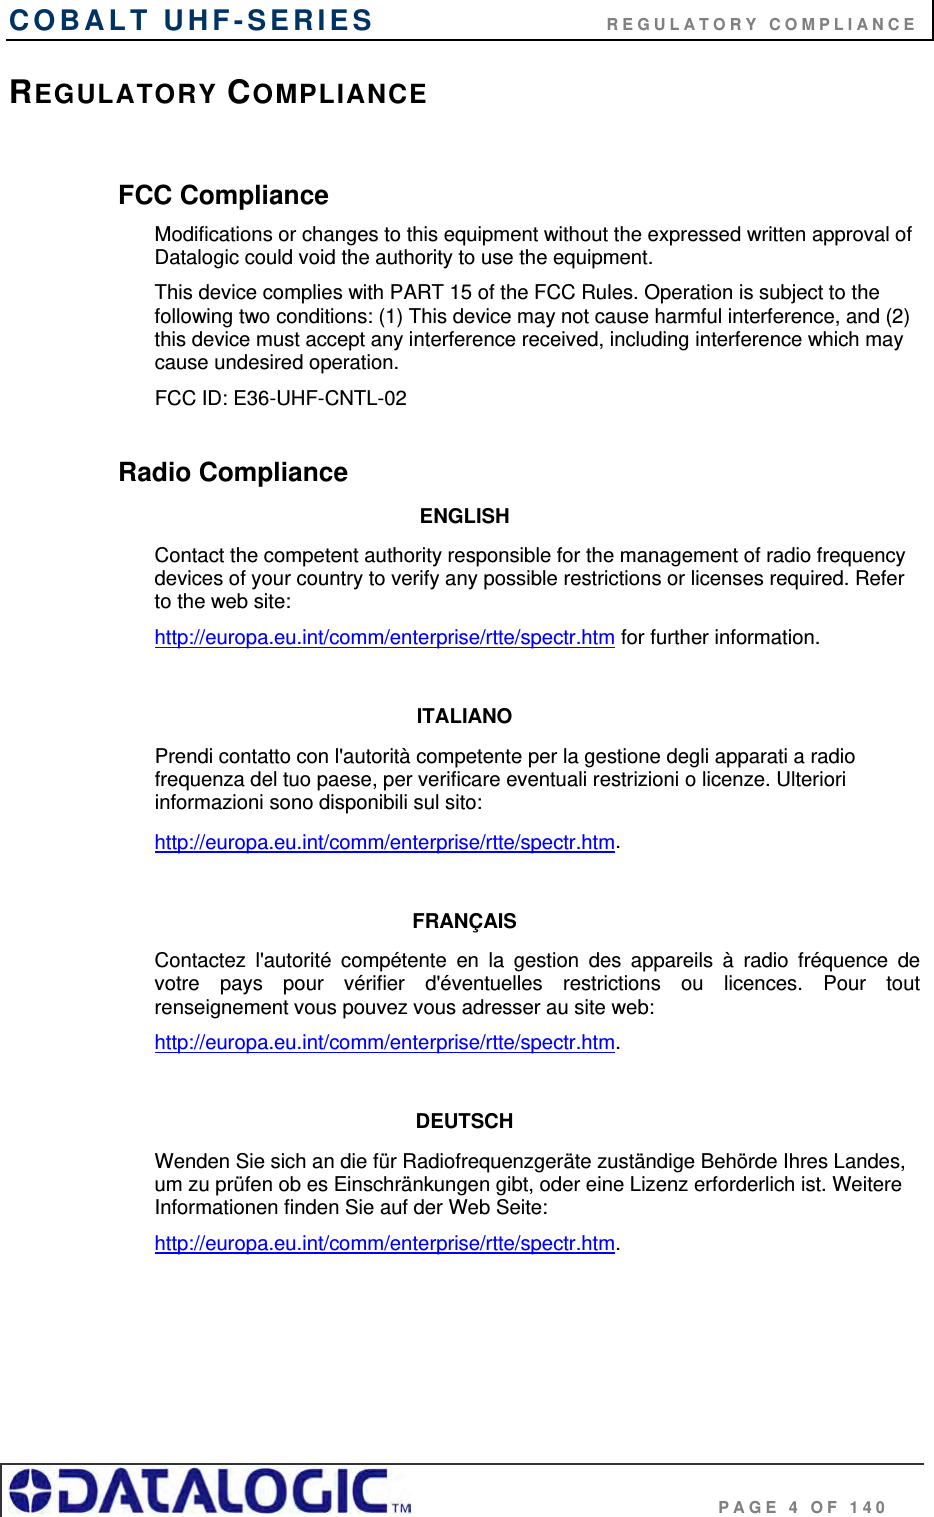 COBALT UHF-SERIES                           REGULATORY COMPLIANCE                                              PAGE 4 OF 140 REGULATORY COMPLIANCE  FCC Compliance Modifications or changes to this equipment without the expressed written approval of Datalogic could void the authority to use the equipment. This device complies with PART 15 of the FCC Rules. Operation is subject to the following two conditions: (1) This device may not cause harmful interference, and (2) this device must accept any interference received, including interference which may cause undesired operation. FCC ID: E36-UHF-CNTL-02  Radio Compliance ENGLISH Contact the competent authority responsible for the management of radio frequency devices of your country to verify any possible restrictions or licenses required. Refer to the web site: http://europa.eu.int/comm/enterprise/rtte/spectr.htm for further information.  ITALIANO Prendi contatto con l&apos;autorità competente per la gestione degli apparati a radio frequenza del tuo paese, per verificare eventuali restrizioni o licenze. Ulteriori informazioni sono disponibili sul sito: http://europa.eu.int/comm/enterprise/rtte/spectr.htm.  FRANÇAIS Contactez l&apos;autorité compétente en la gestion des appareils à radio fréquence de votre pays pour vérifier d&apos;éventuelles restrictions ou licences. Pour tout renseignement vous pouvez vous adresser au site web: http://europa.eu.int/comm/enterprise/rtte/spectr.htm.  DEUTSCH Wenden Sie sich an die für Radiofrequenzgeräte zuständige Behörde Ihres Landes, um zu prüfen ob es Einschränkungen gibt, oder eine Lizenz erforderlich ist. Weitere Informationen finden Sie auf der Web Seite: http://europa.eu.int/comm/enterprise/rtte/spectr.htm.     